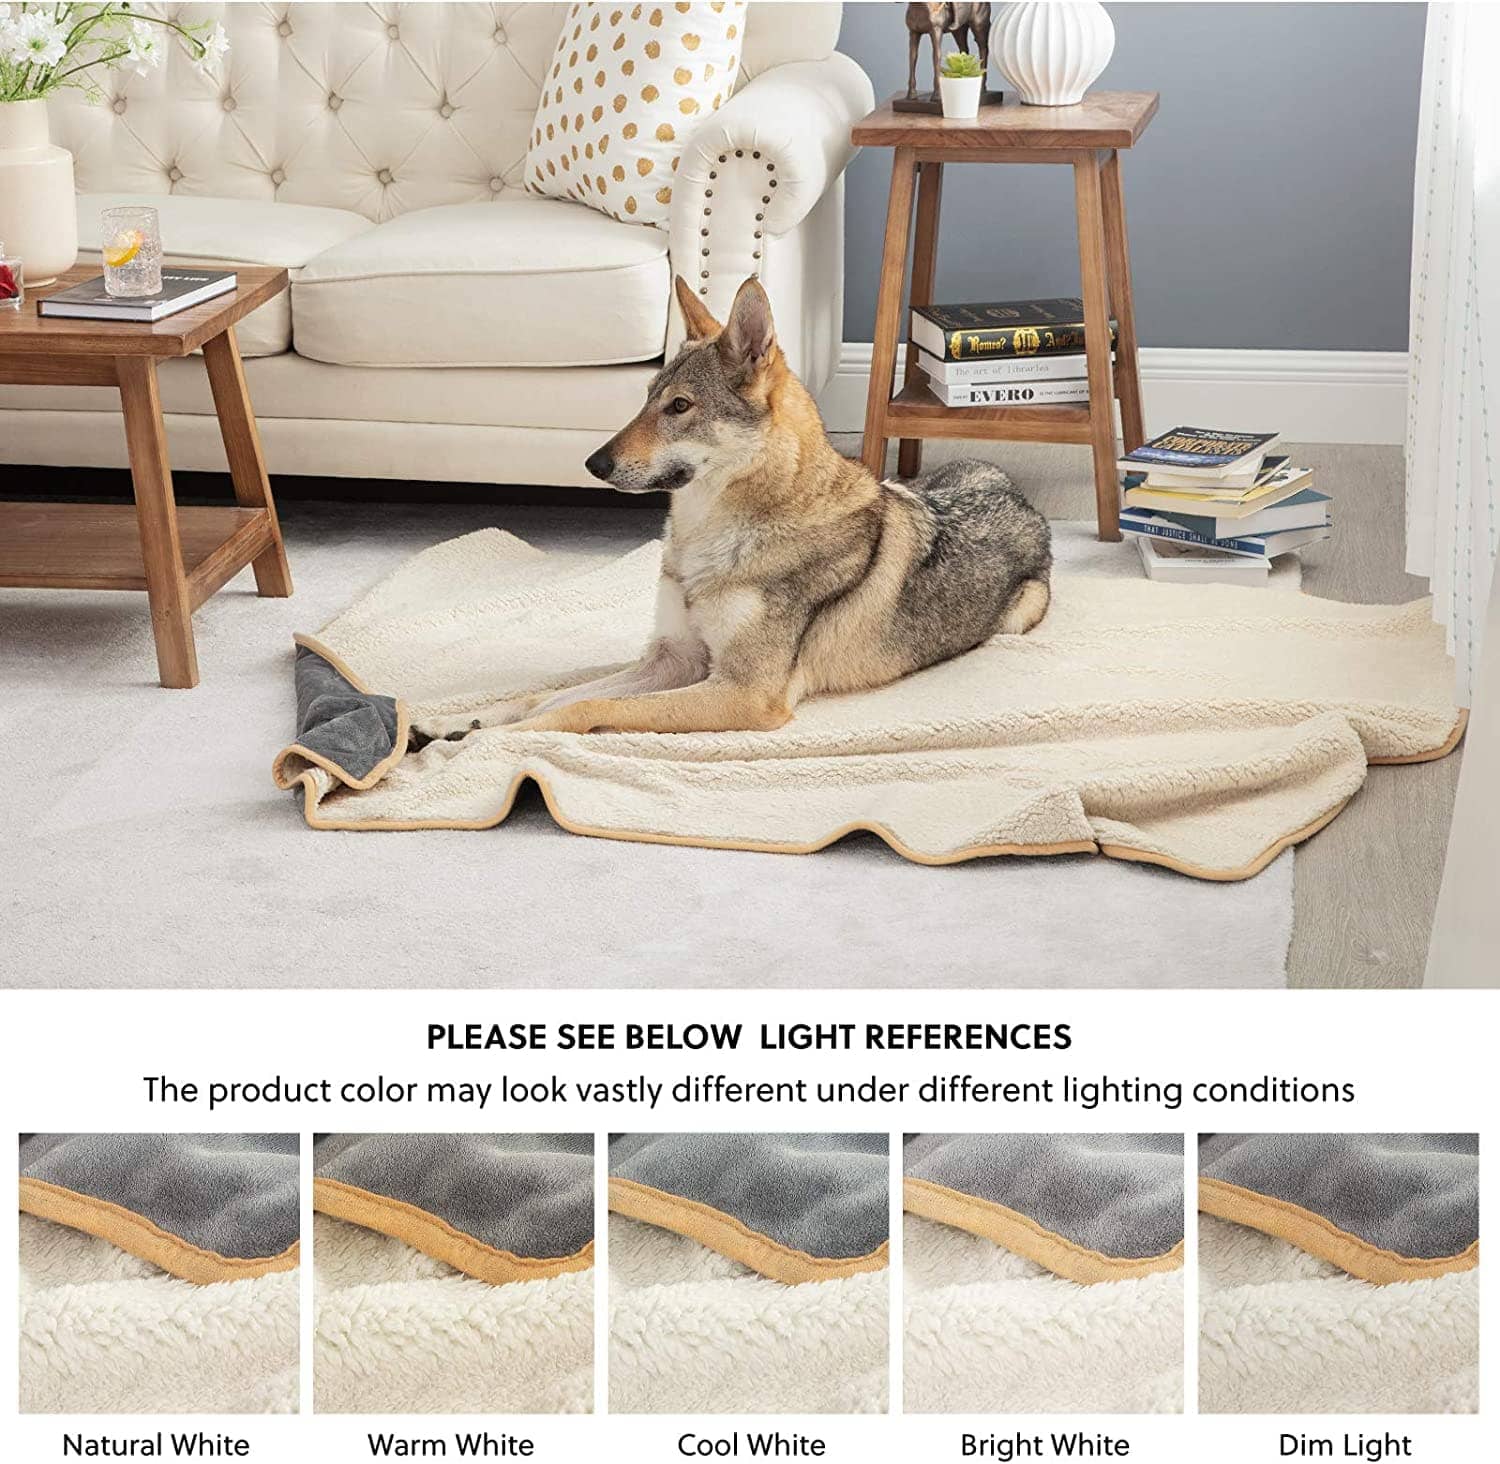 bedsure-waterproof-dog-blankets-for-large-dogs-large-cat-blanket-washable-for-couch-protection-sherpa-fleece-puppy-blanket-soft-plush-reversible-throw-furniture-protector-40x50-grey-l40x50-grey